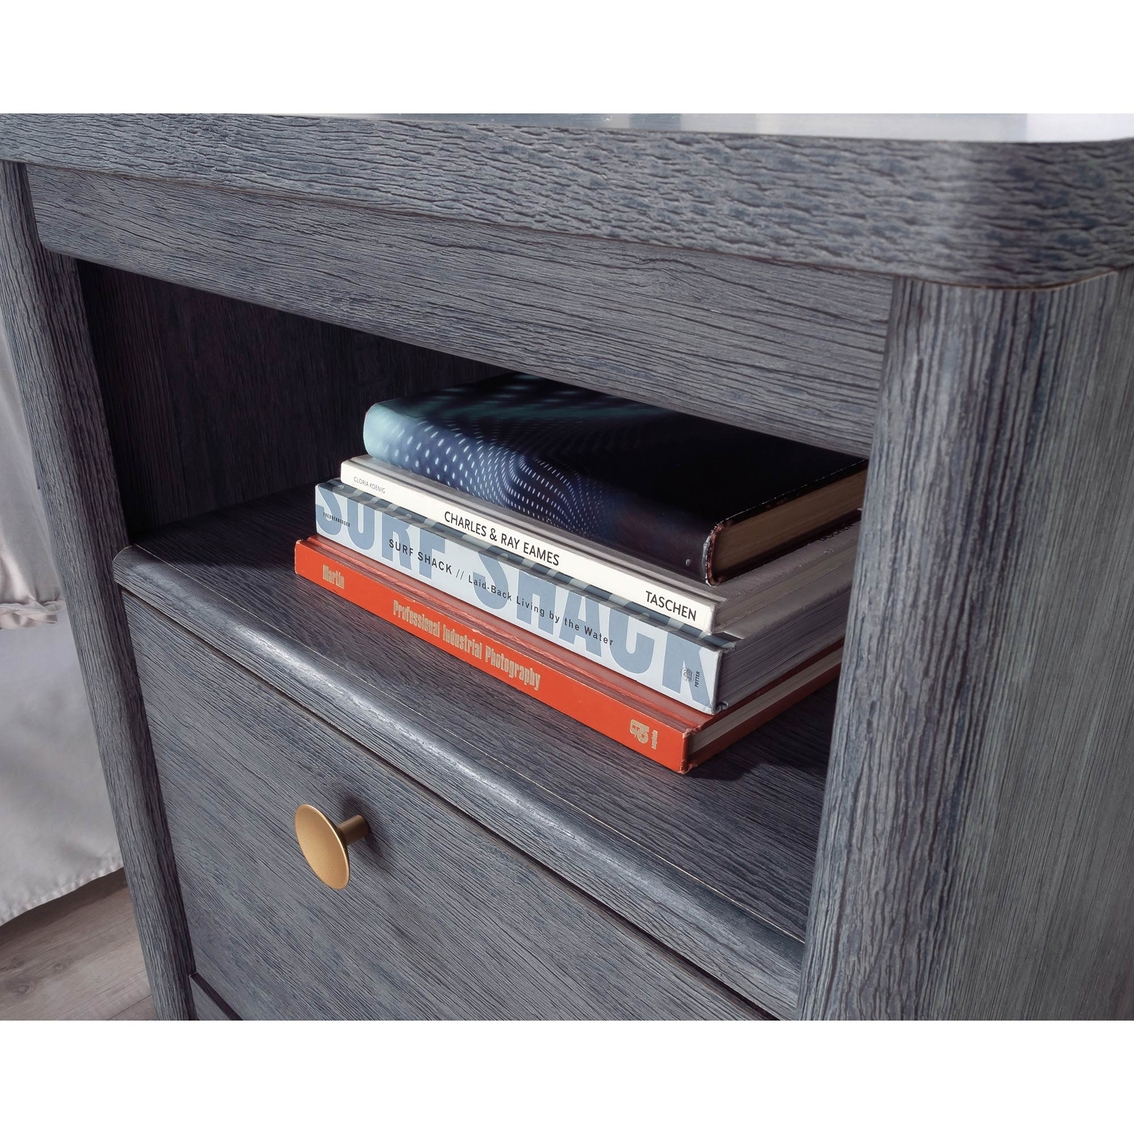 Sauder Night Stand with Drawer in Denim Oak - Image 5 of 8